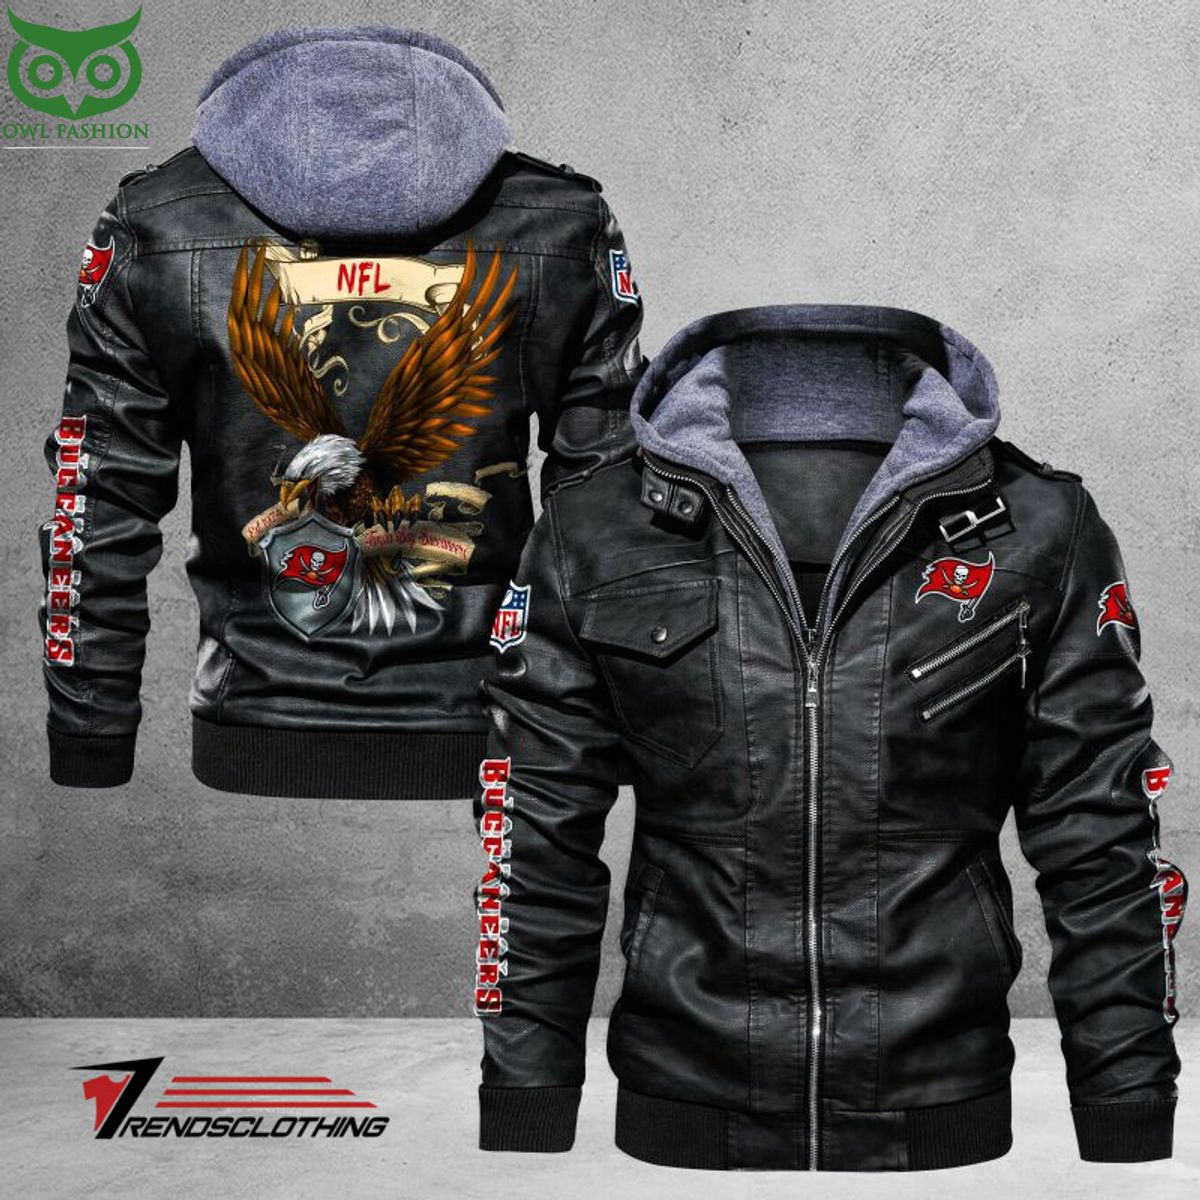 Tampa Bay Buccaneers Trending Owl Shop 2D - Fashion Jacket Leather